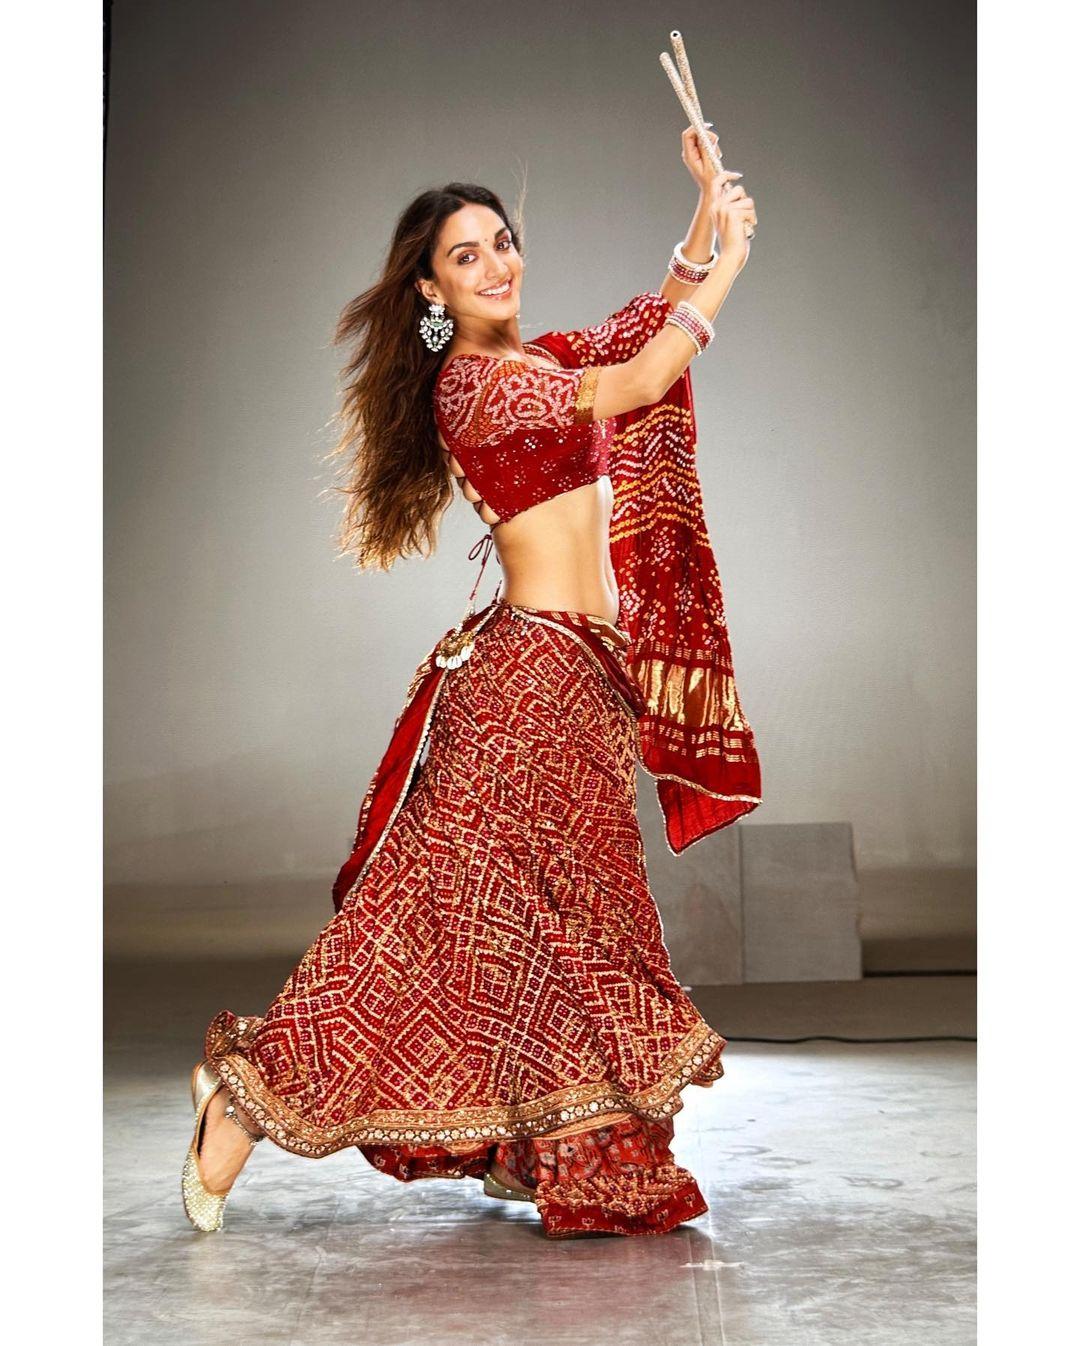 Kiara Advani, for the film 'Satyaprem Ki Katha', donned a striking red chaniya choli that has left fashion enthusiasts in awe. With exquisite embroidery and a rich red palette, her lehenga looks have consistently caught the discerning eye of fashion critics. She effortlessly embodies elegance and tradition, making her a style icon for Navratri fashion.